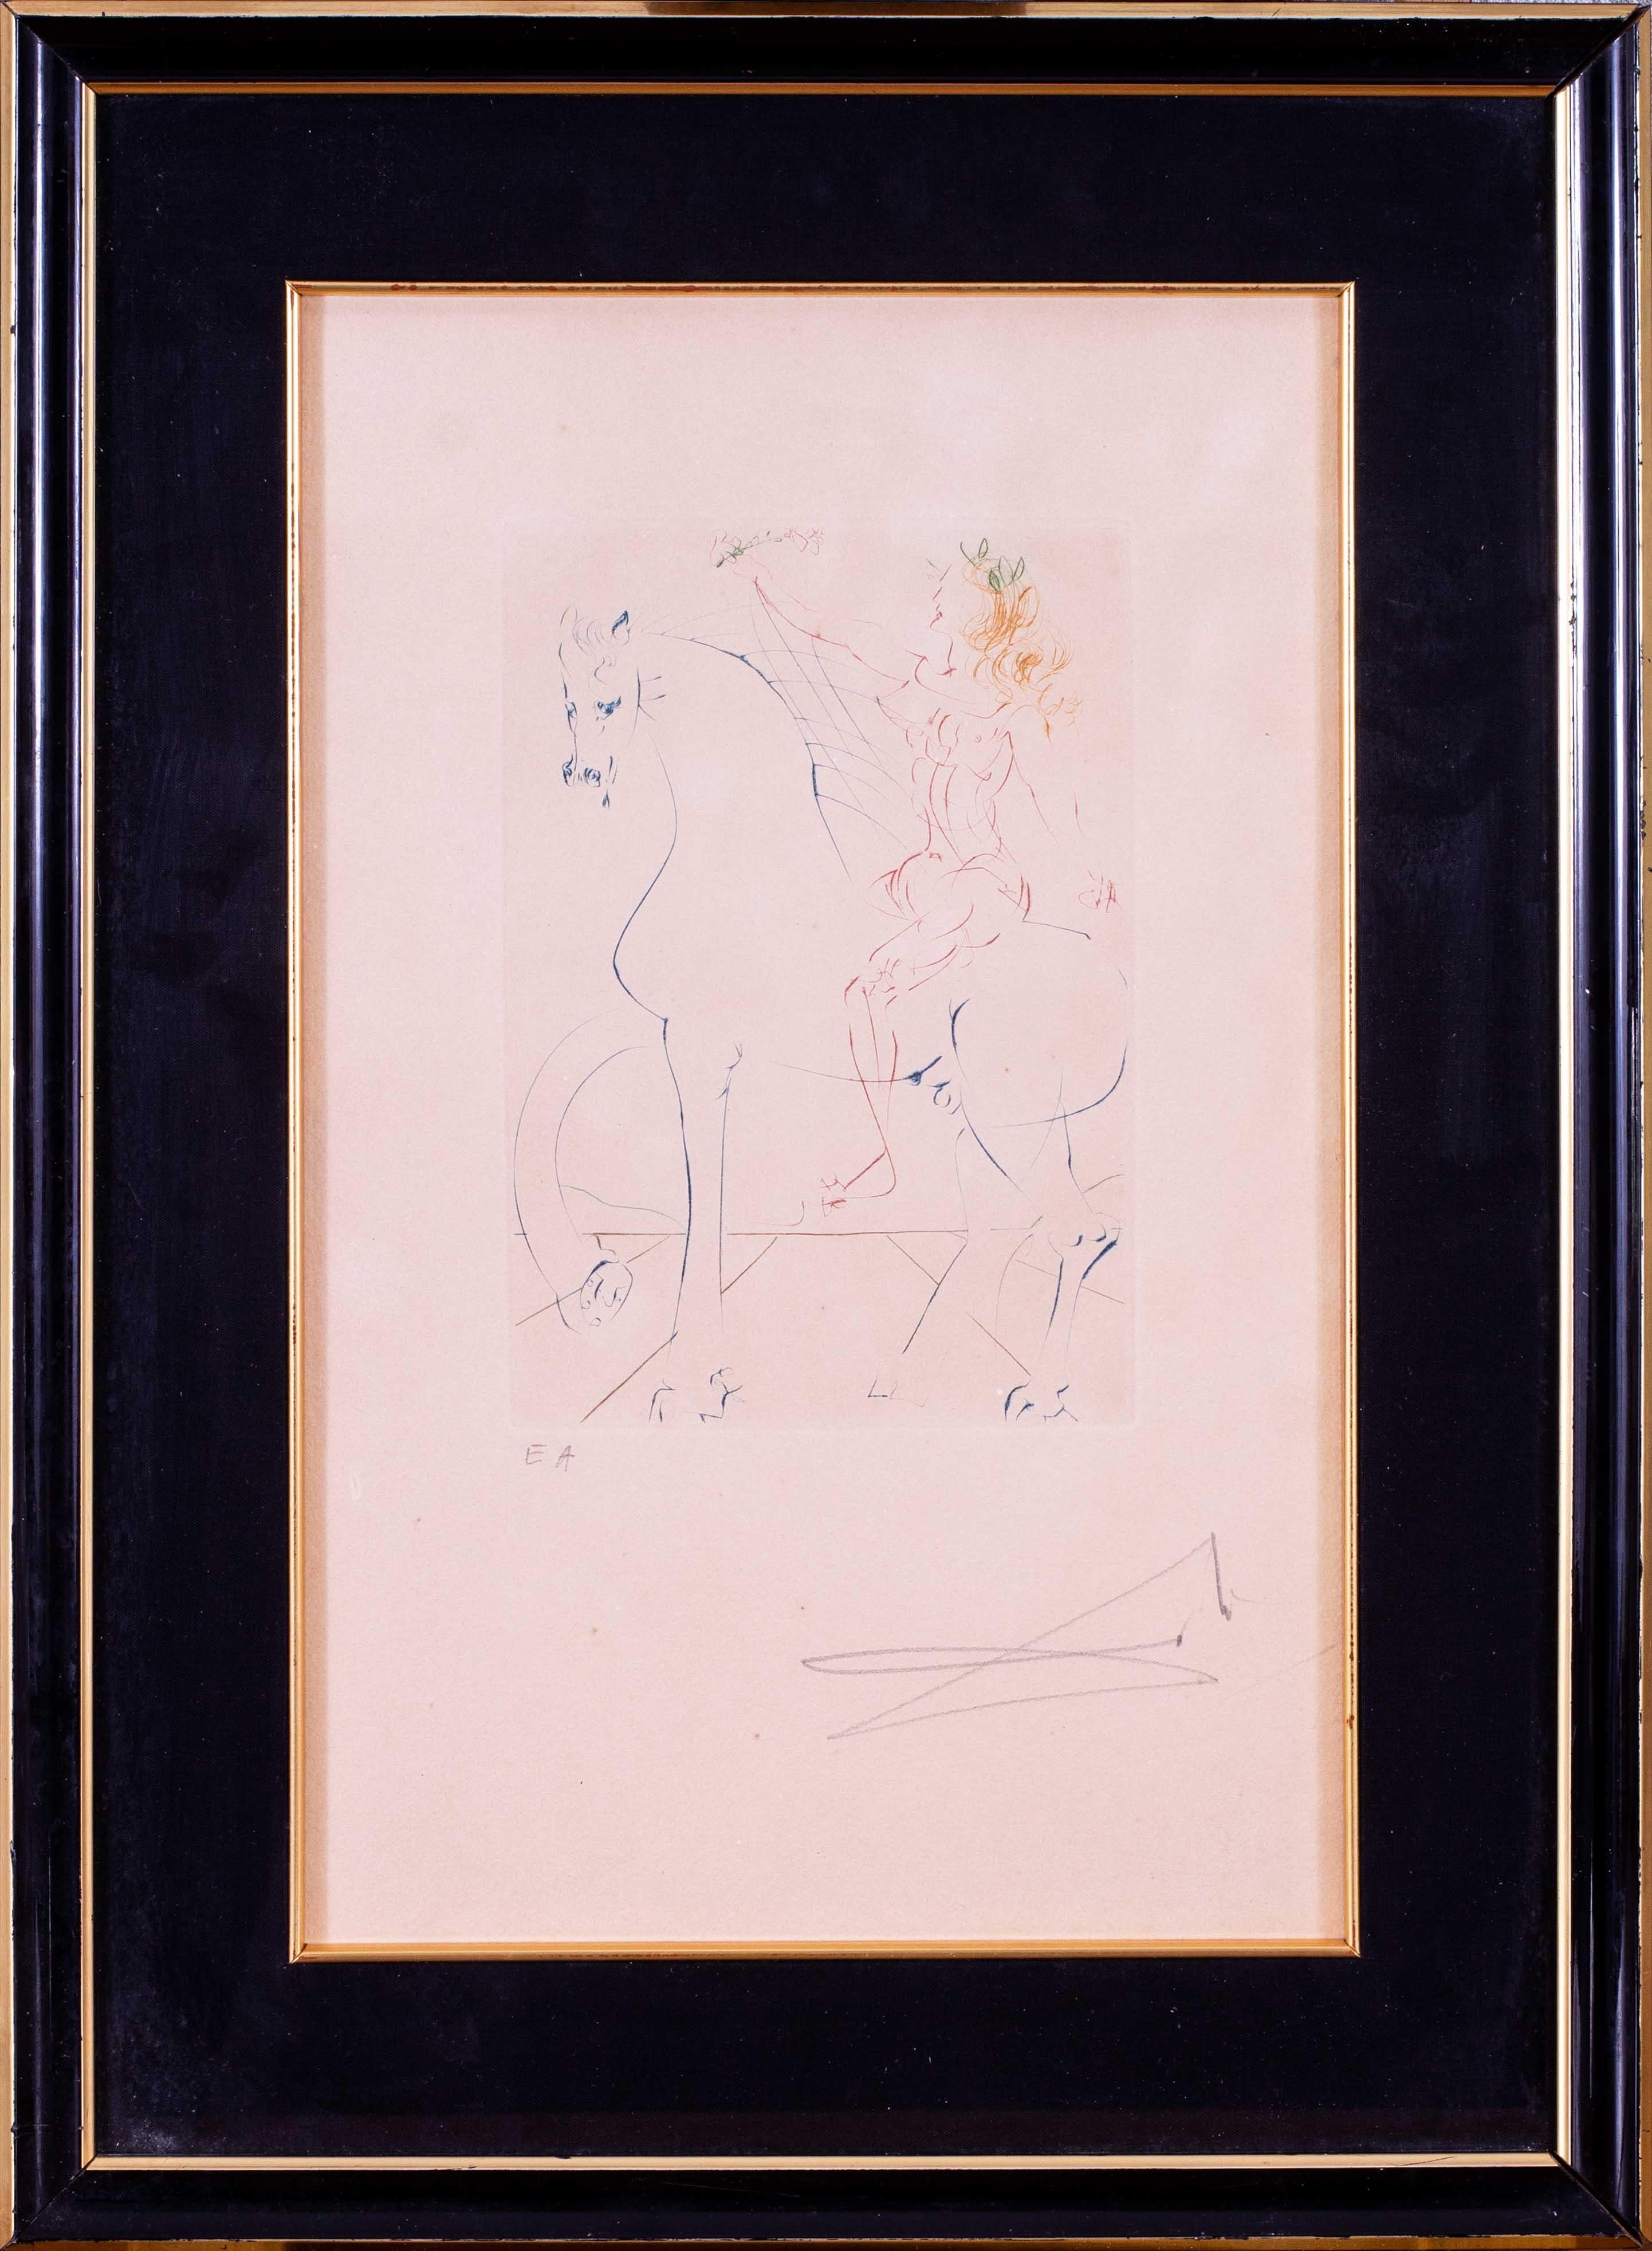 Salvador Dalí Animal Print - Salvador Dali signed drypoint etching 'Triumph' from Women and Horses, 1973